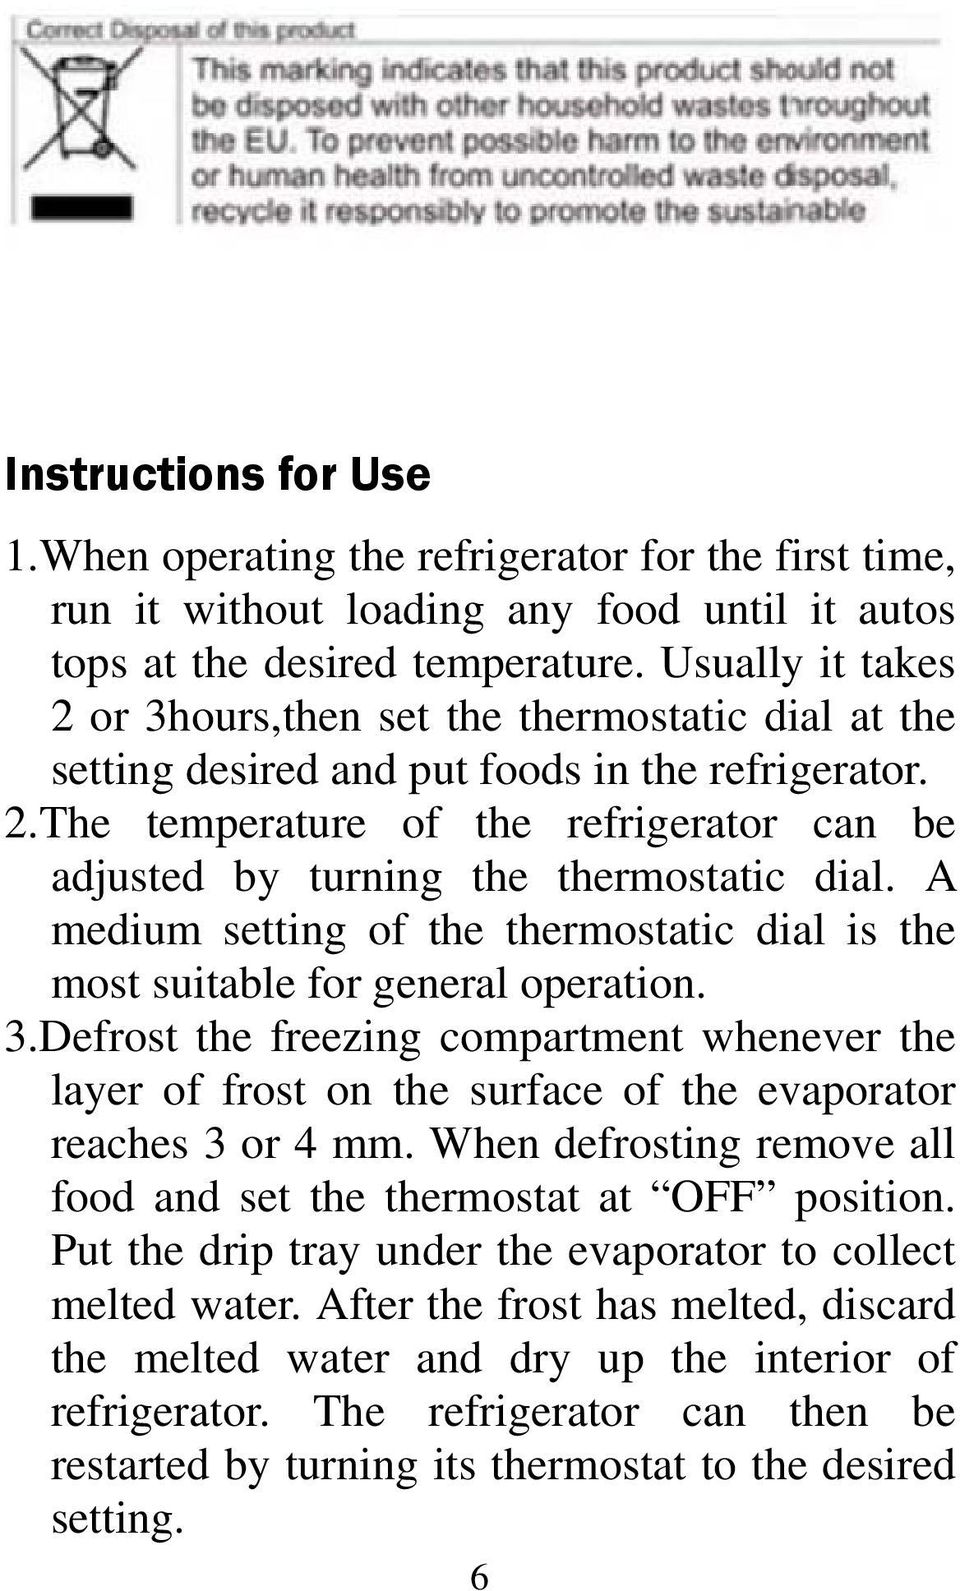 A medium setting of the thermostatic dial is the most suitable for general operation. 3.Defrost the freezing compartment whenever the layer of frost on the surface of the evaporator reaches 3 or 4 mm.